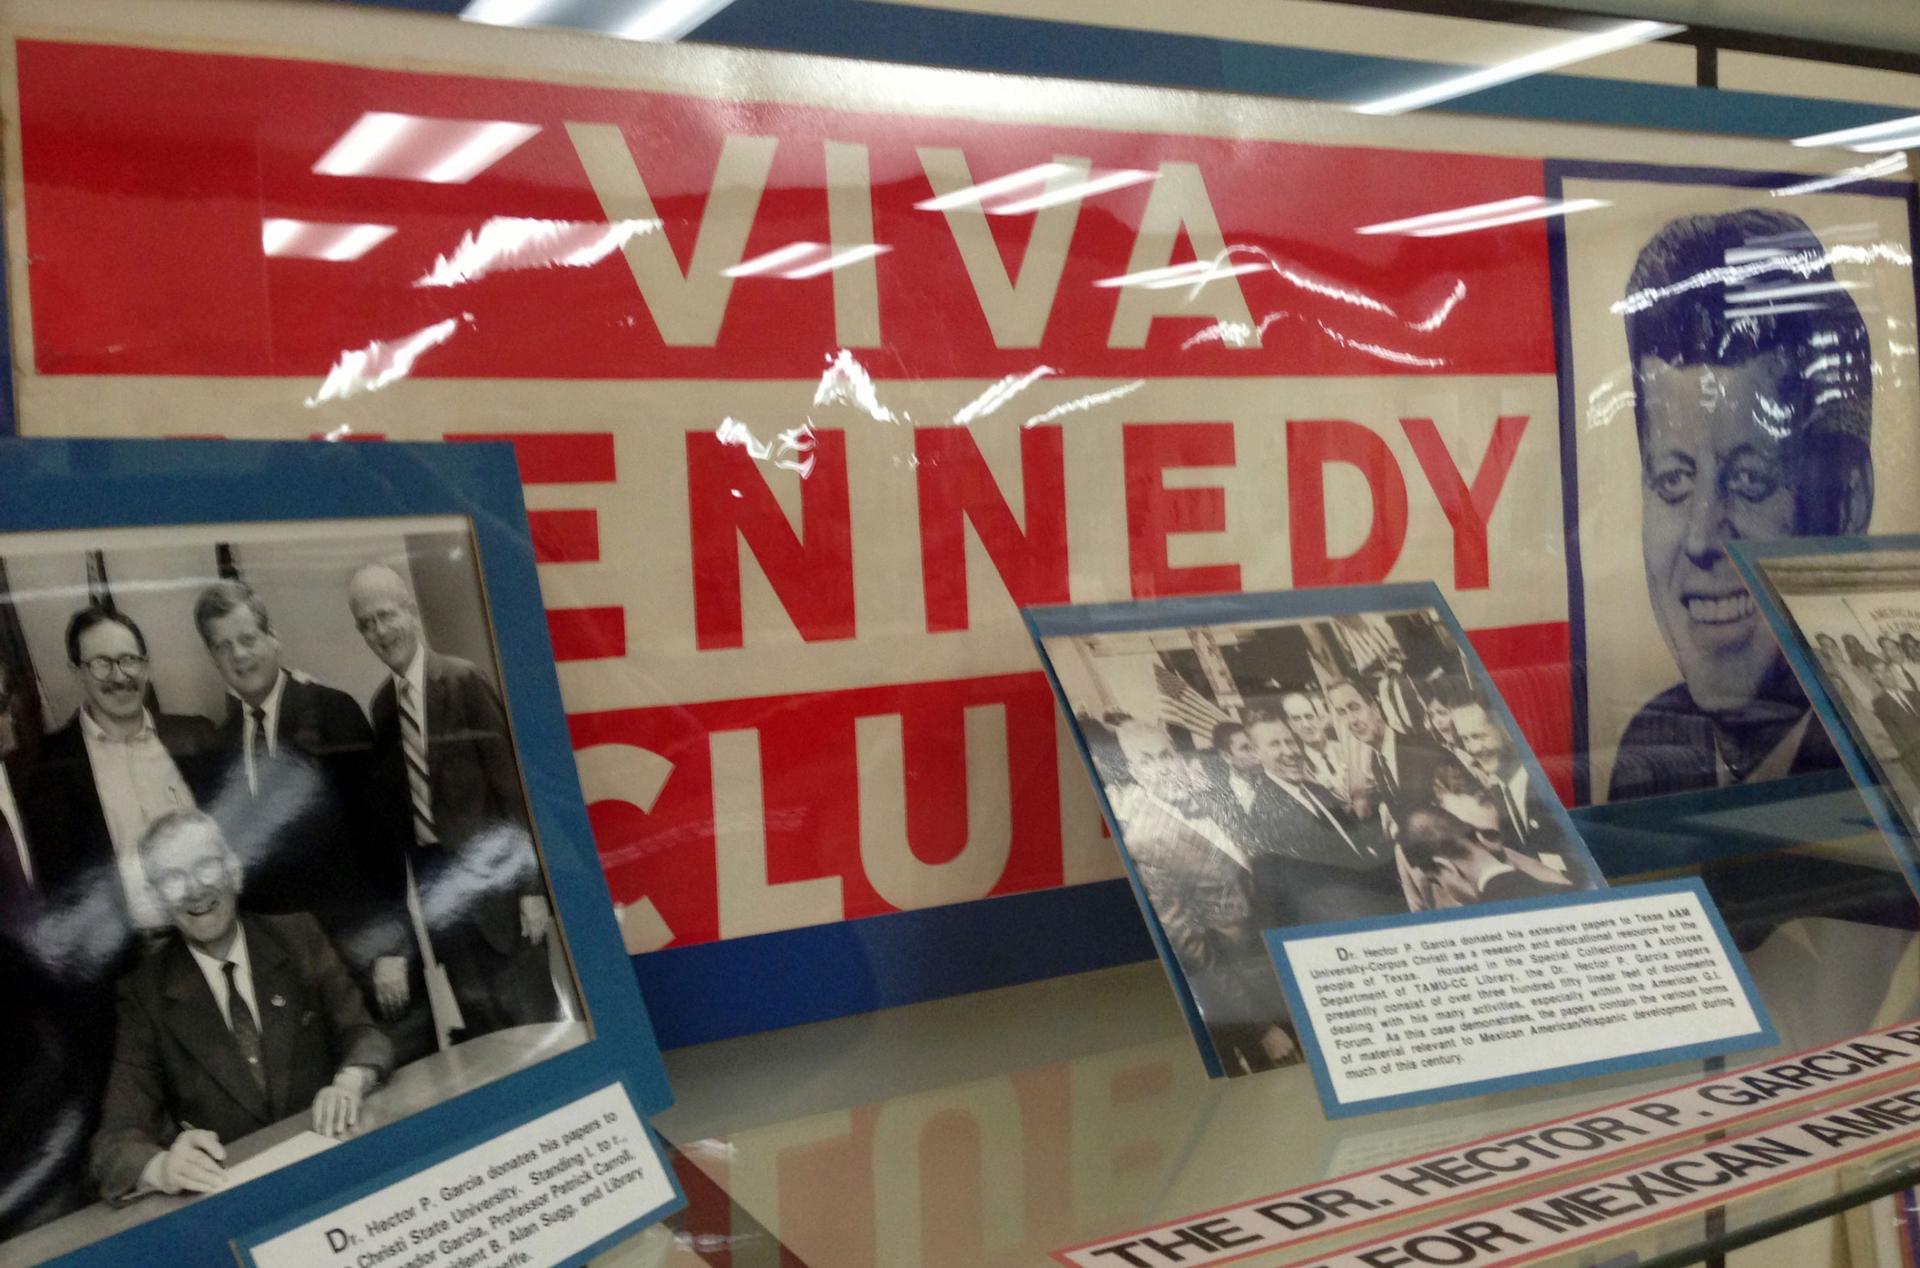 Old Viva Kennedy! campaign buttons of civil rights leader and G.I. Forum founder Dr. Hector P. Garcia, lower left, are shown at the Garcia exhibit at Texas A&M-Corpus Christi, Texas.